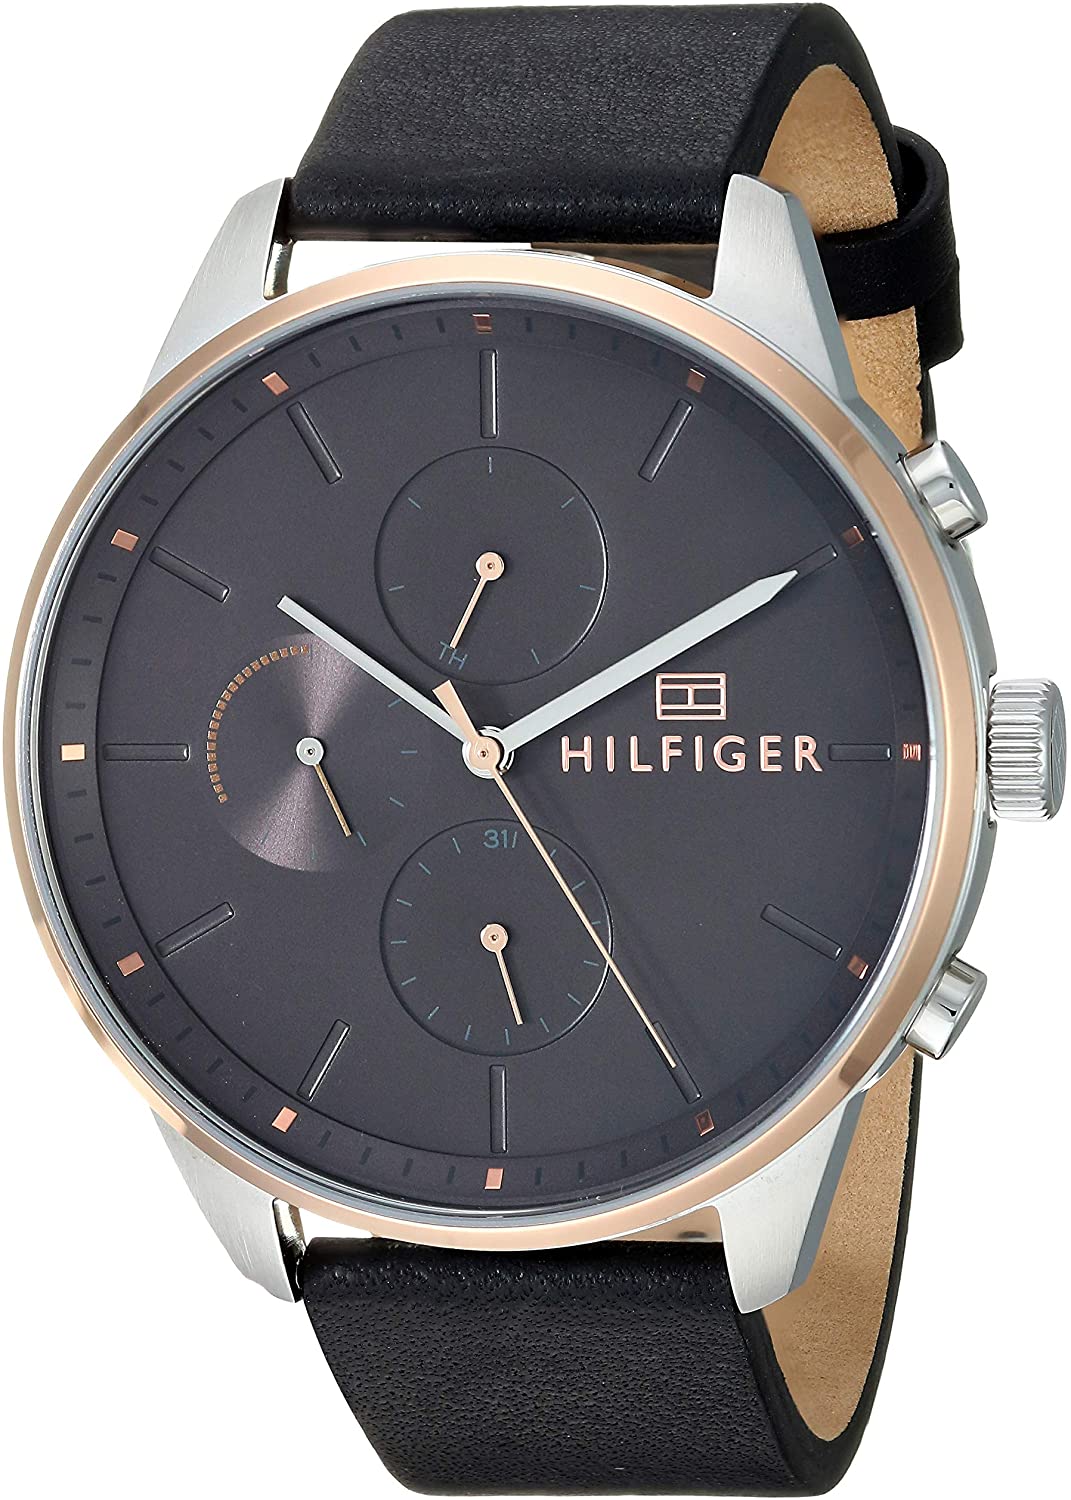 Tommy Hilfiger Men's Casual Stainless Steel Quartz Watch with Leather Strap, Black, 20 (Model: 1791488)